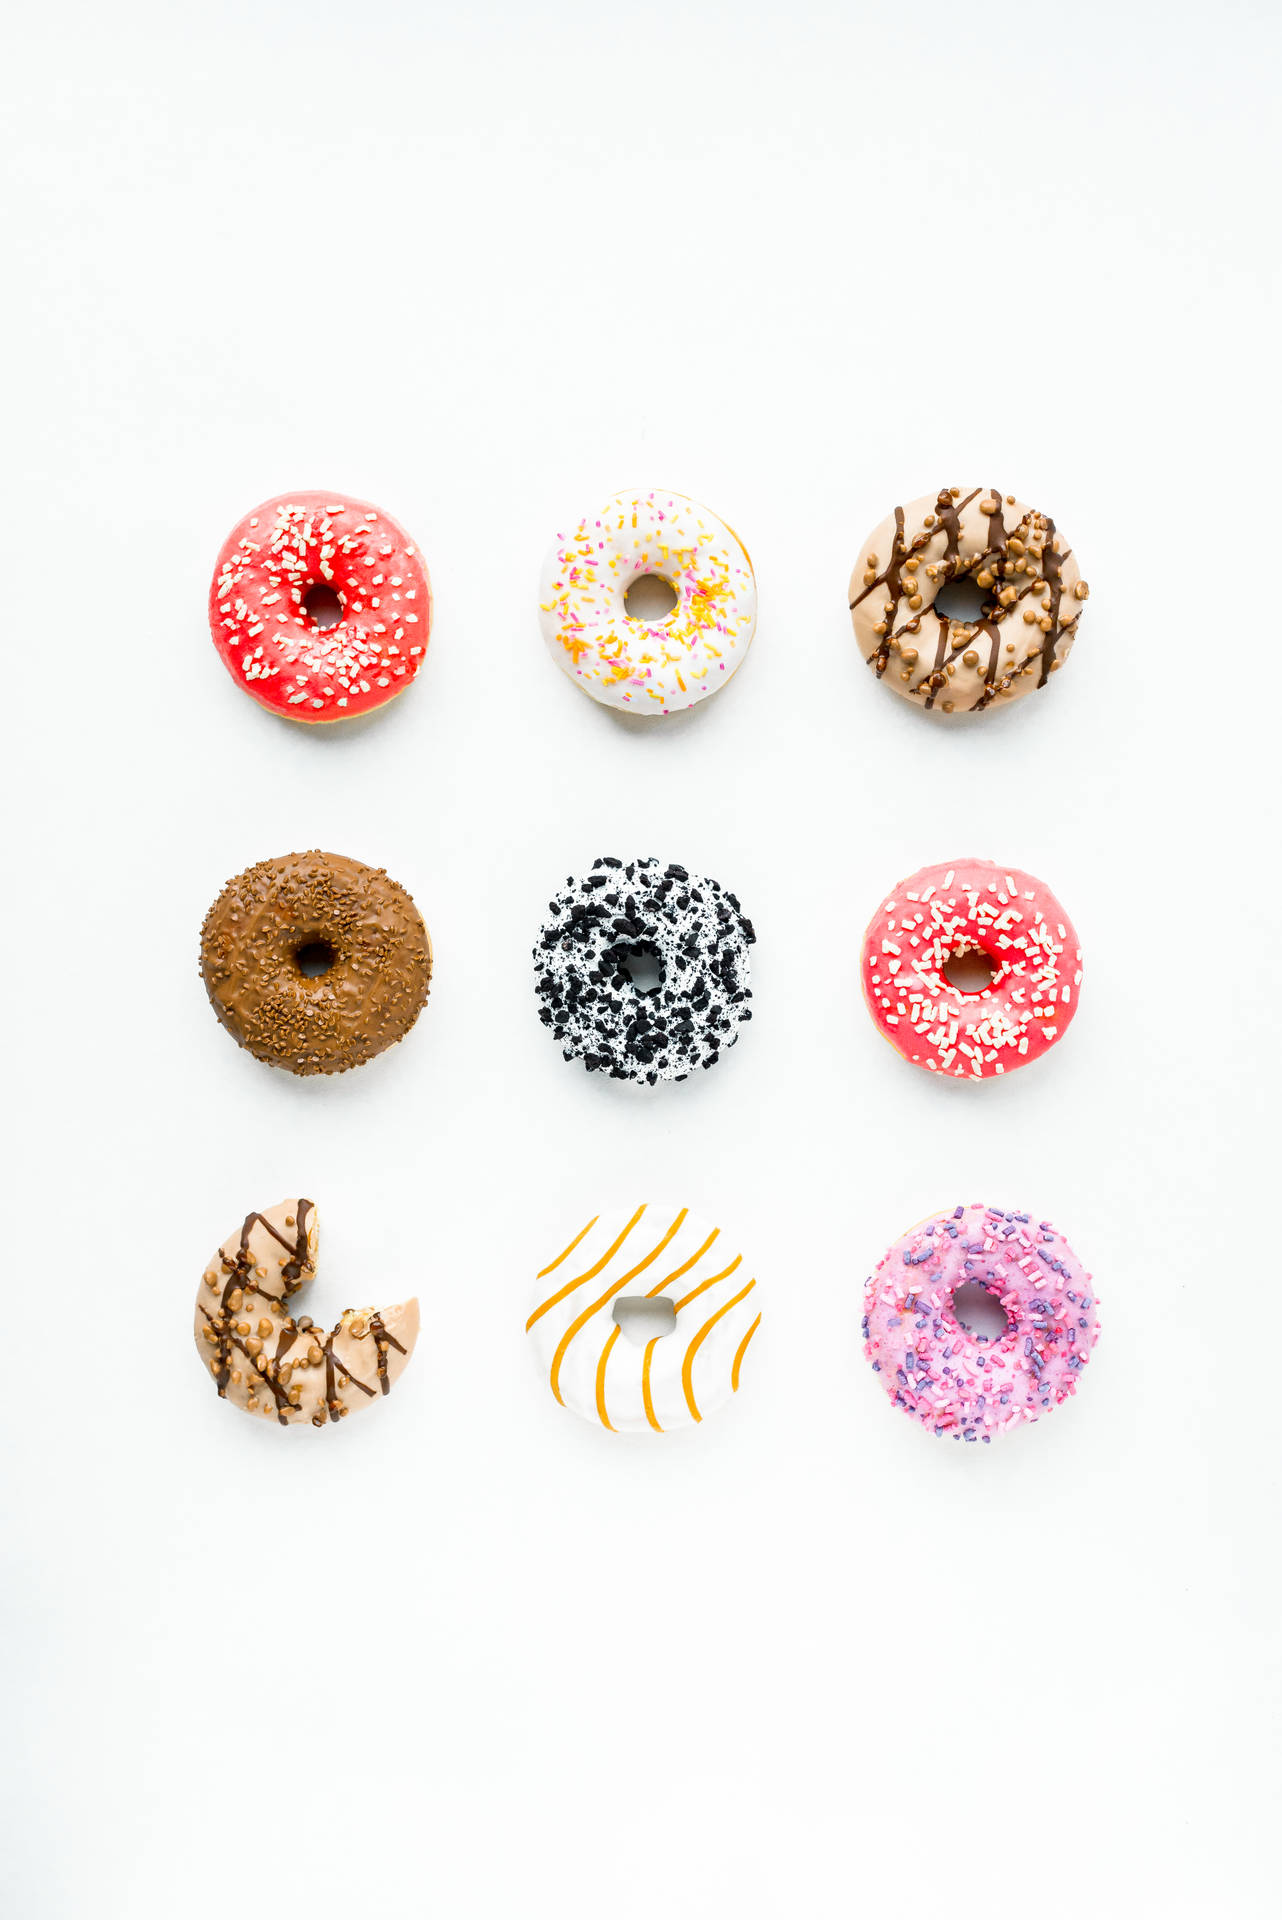 Assorted Doughnuts Pastry Wallpaper